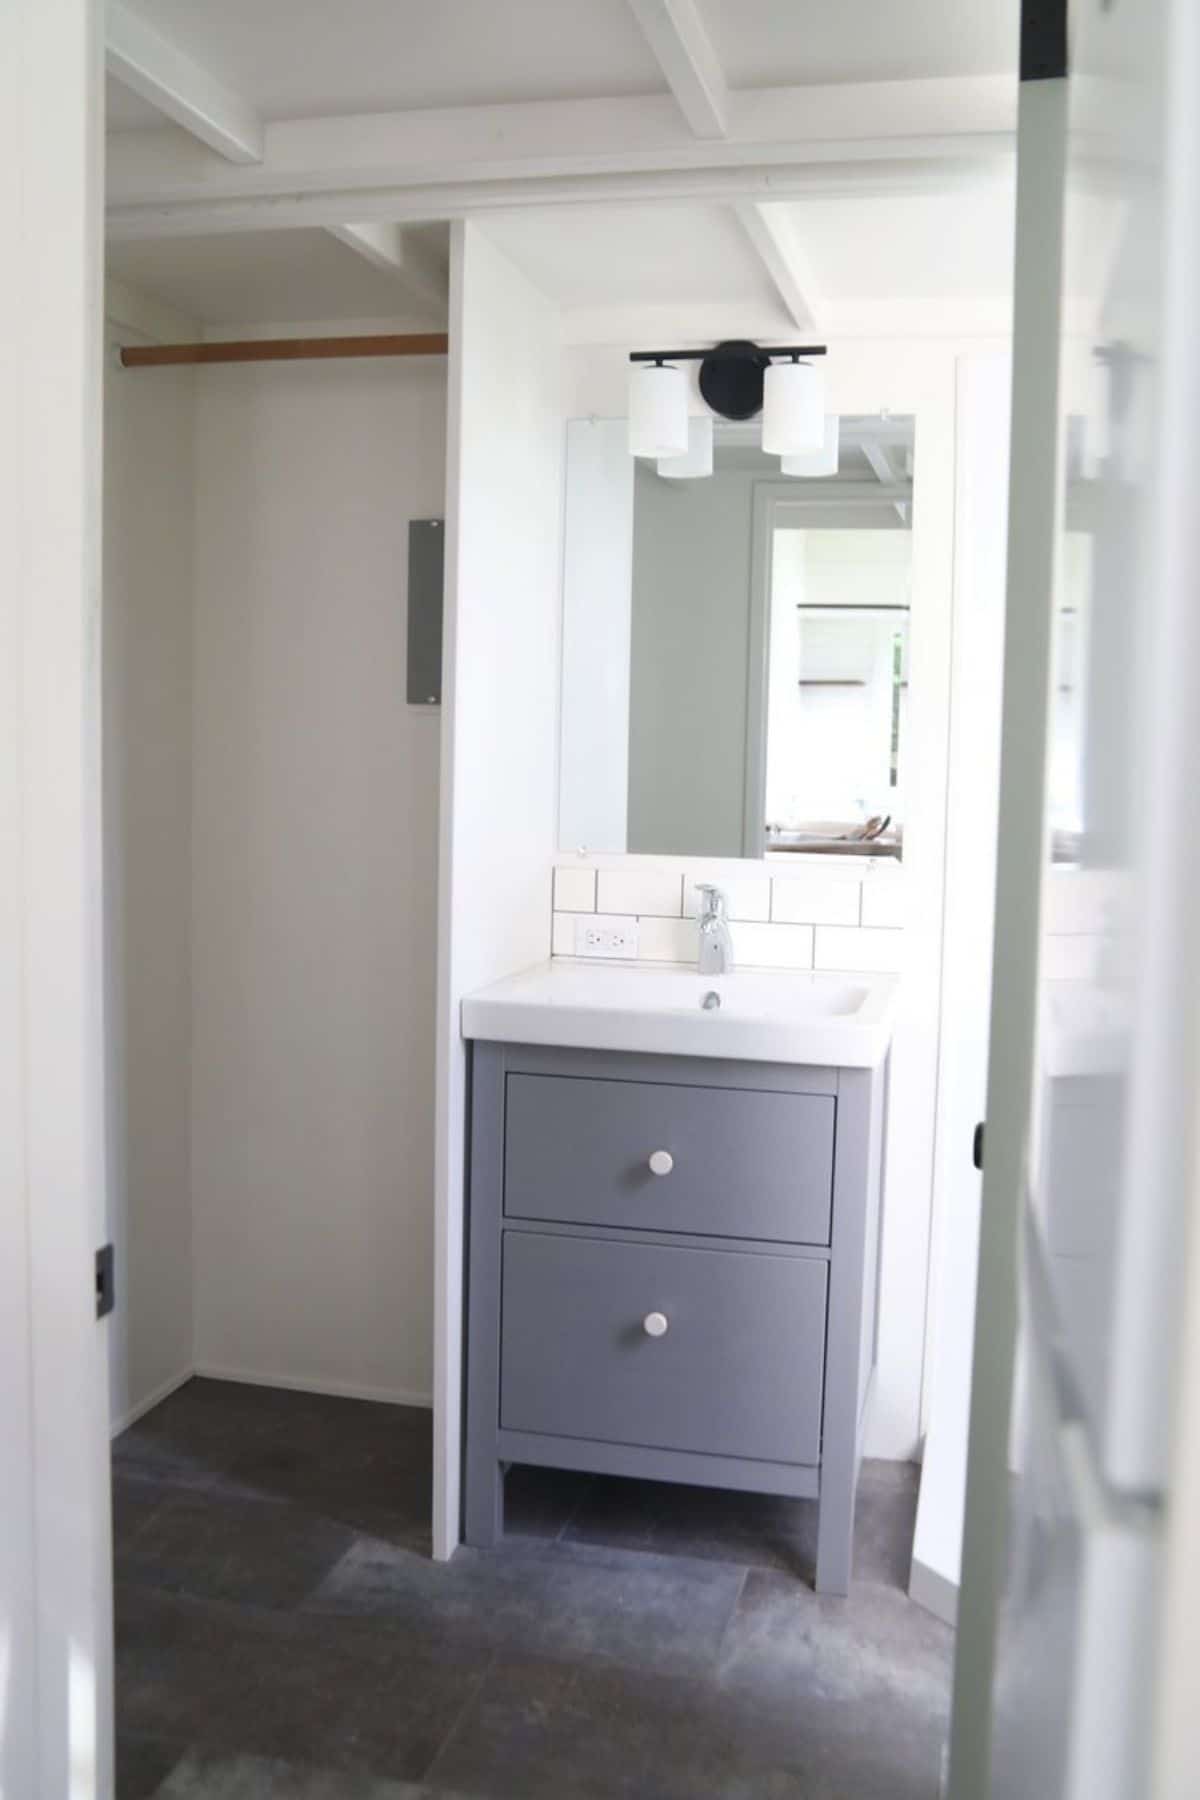 Gray vanity base in bathroom with small closet by mirror